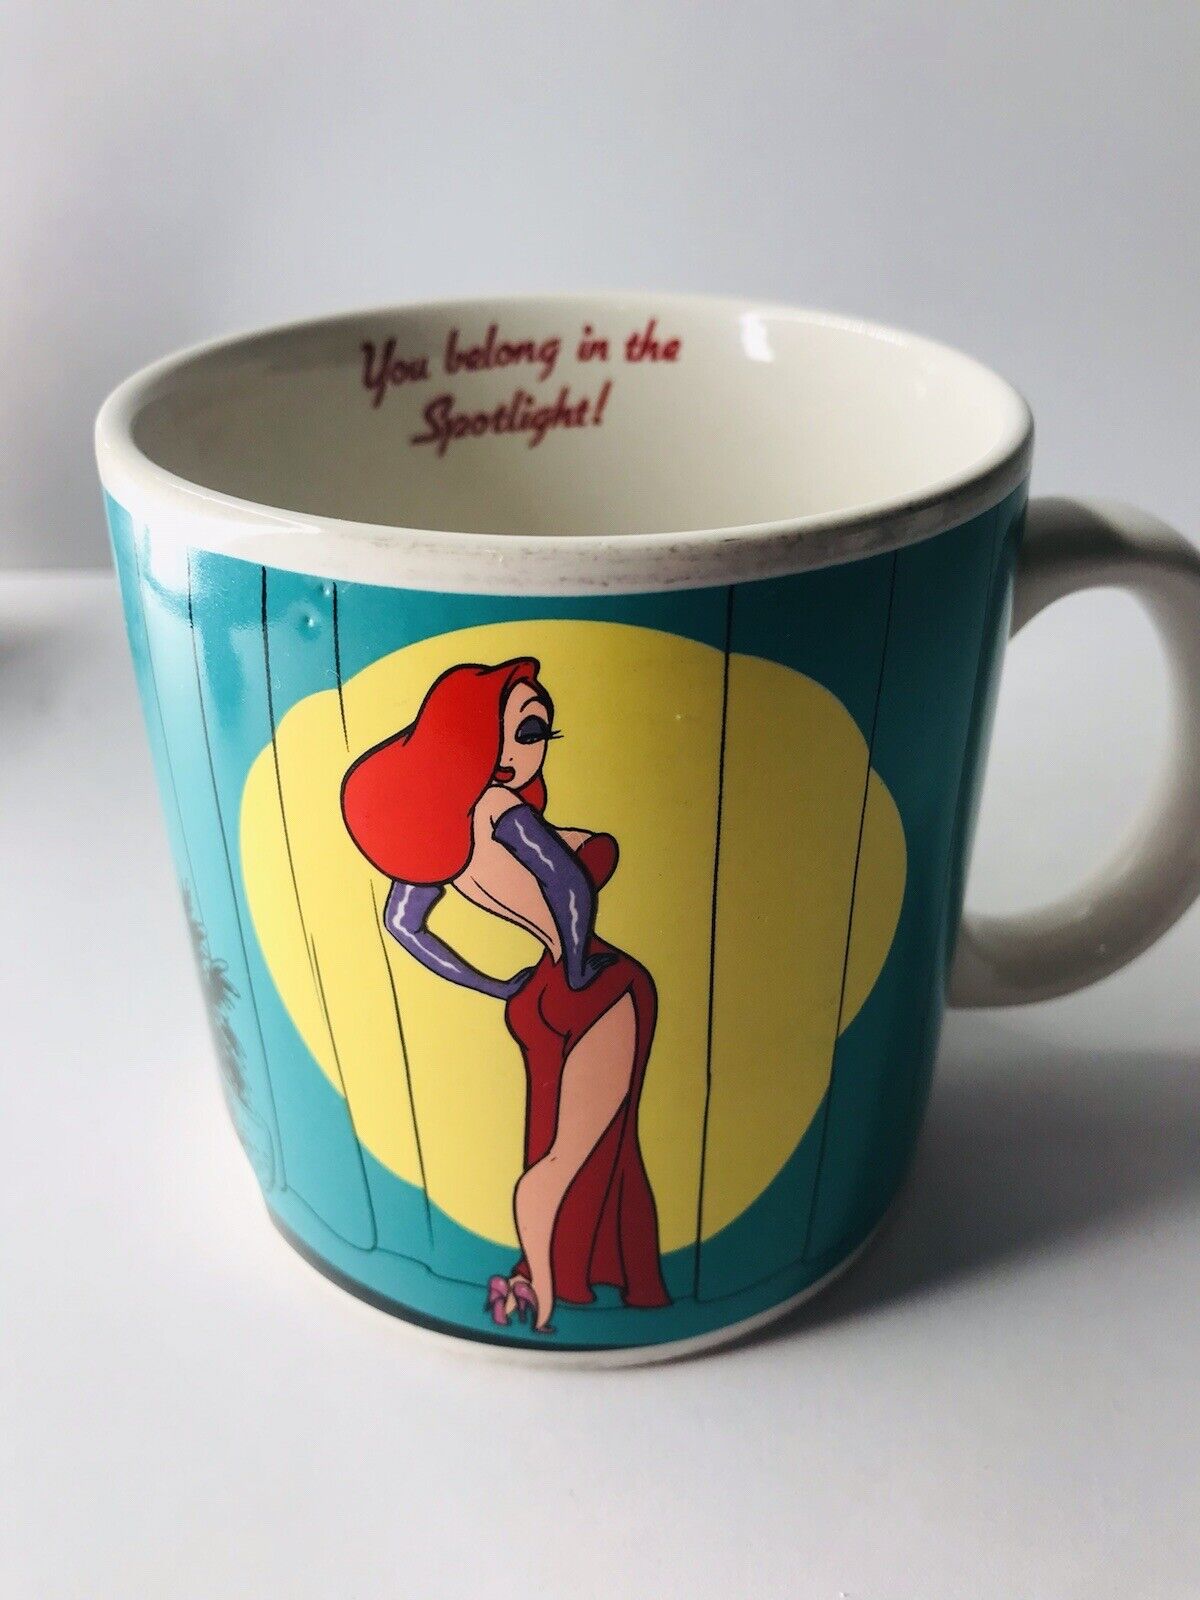 VINTAGE ROGER JESSICA RABBIT COFFEE CUP YOU BELONG IN THE SPOTLIGHT APPLAUSE MUG